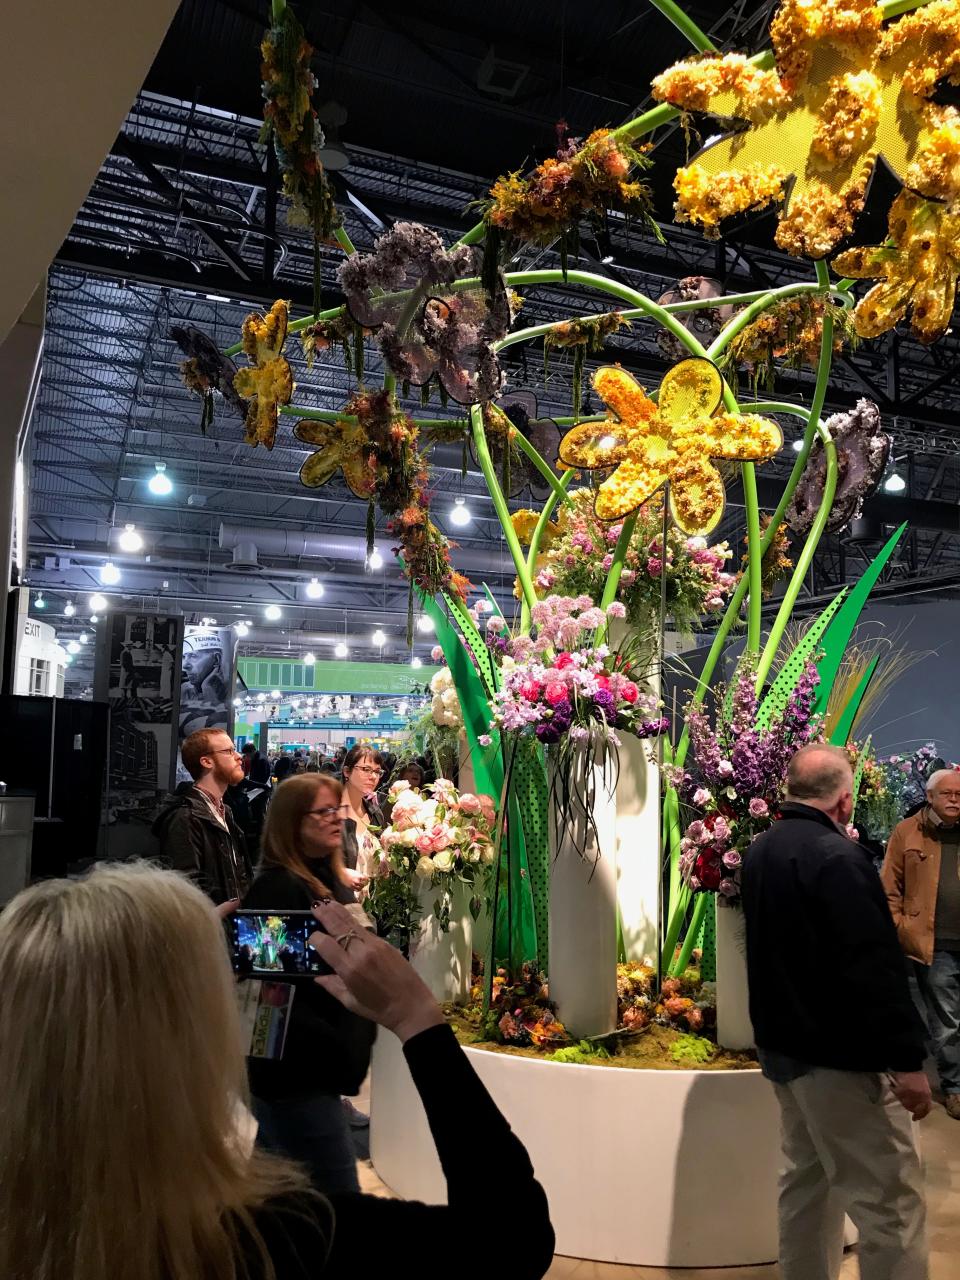 Pop art vines and flowers welcome guests to the 2019 Philadelphia Flower Show, which has "Flower Power" as its theme.